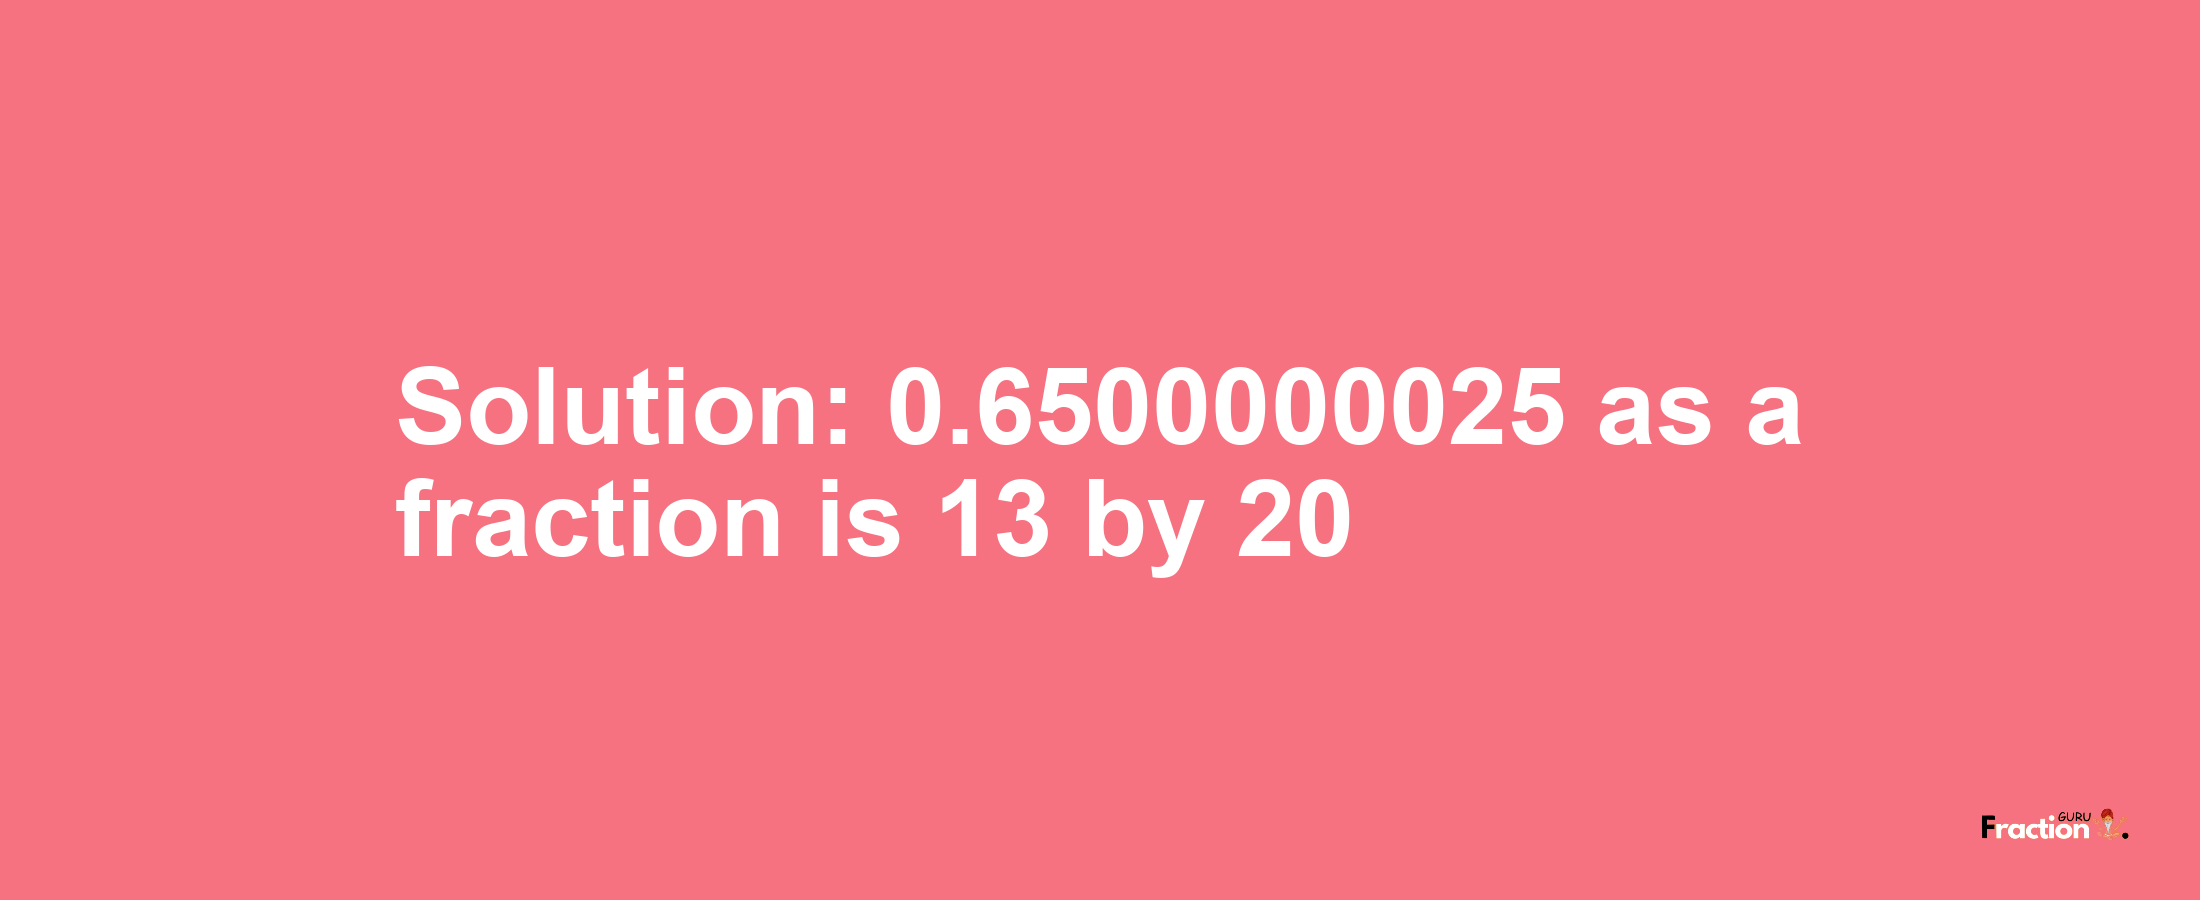 Solution:0.6500000025 as a fraction is 13/20